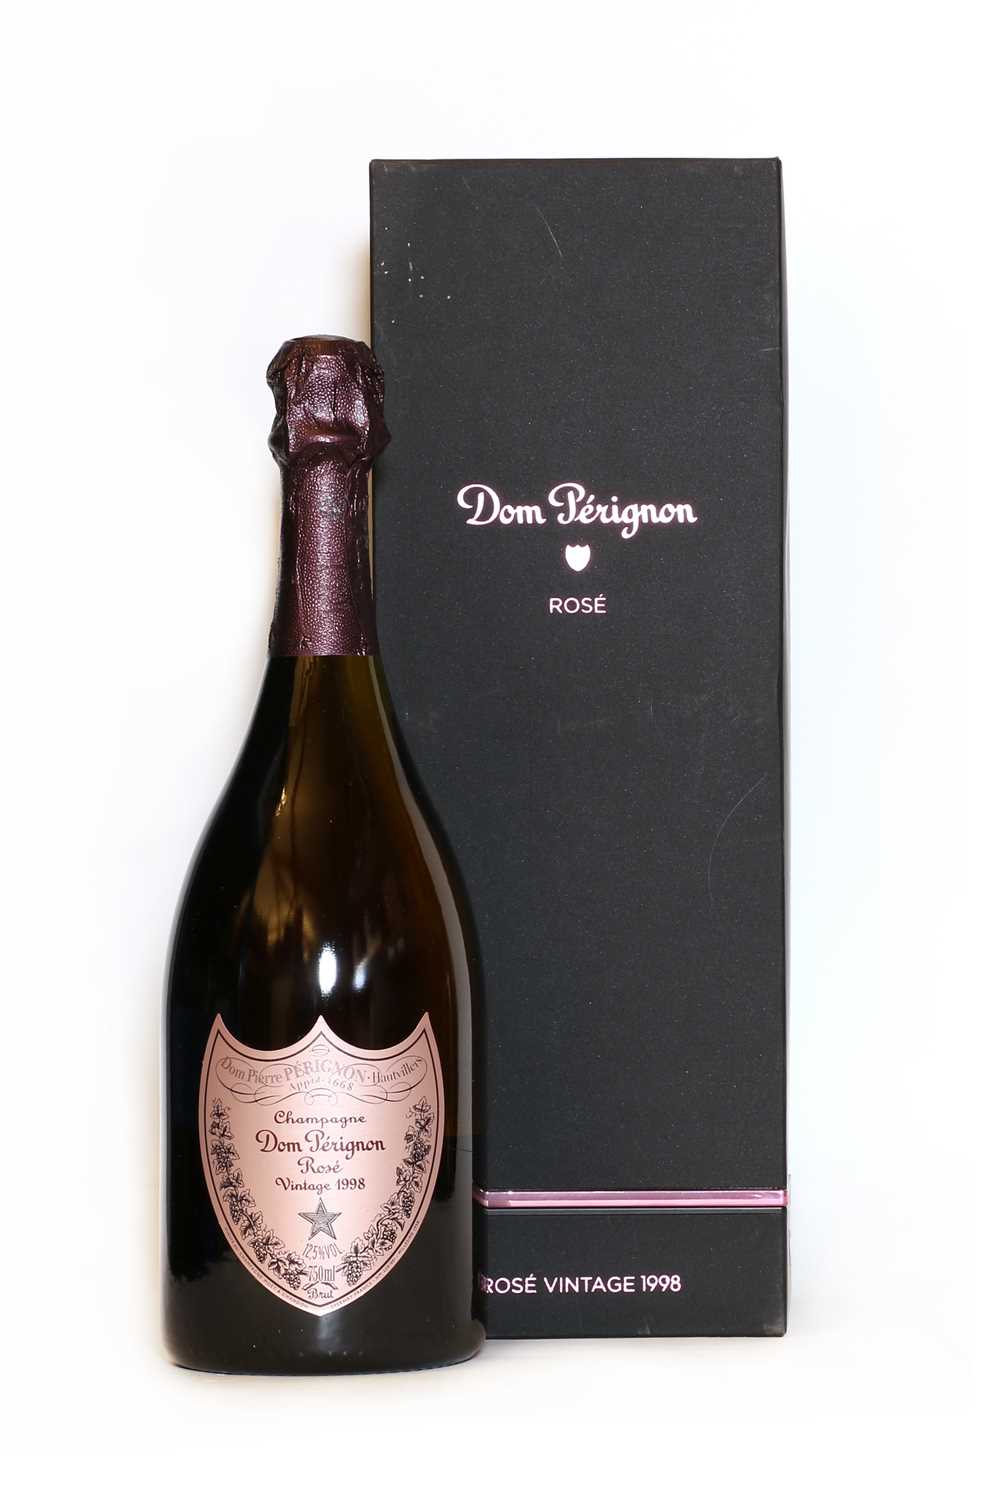 Lot 27 - Moet & Chandon, Epernay, Dom Perignon rose, 1998, boxed (1)